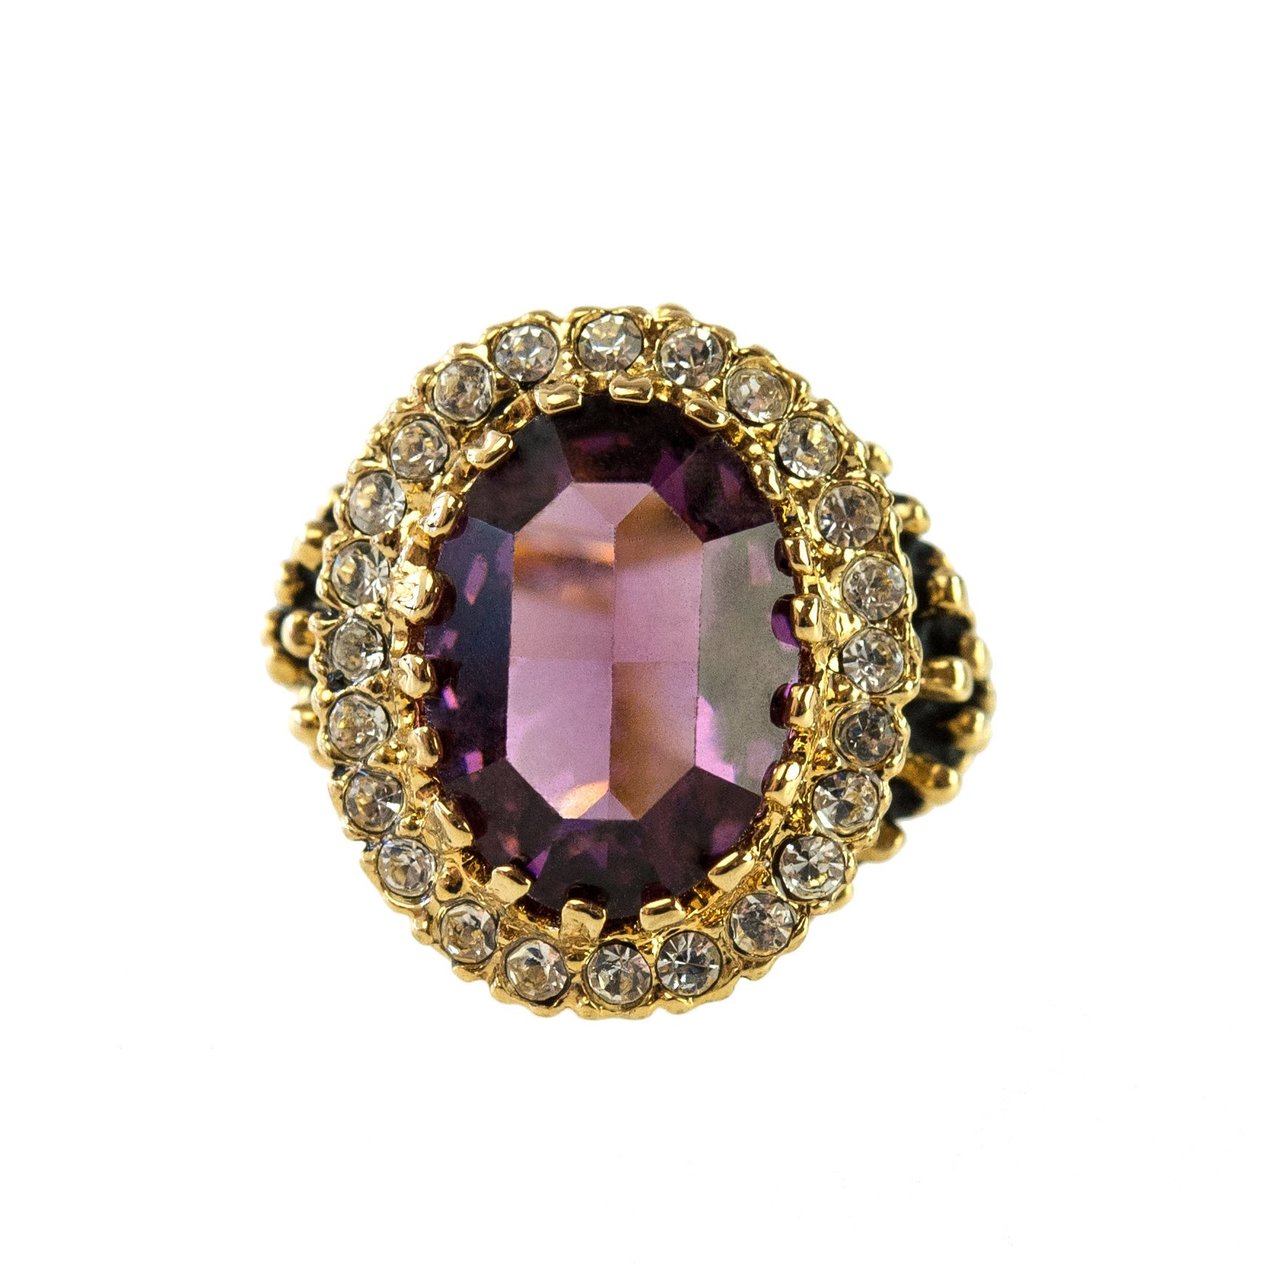 Vintage Amethyst and Clear Crystal 18k Antiqued Yellow Gold Electroplated Ring Made in the USA by PVD Vintage Jewelry